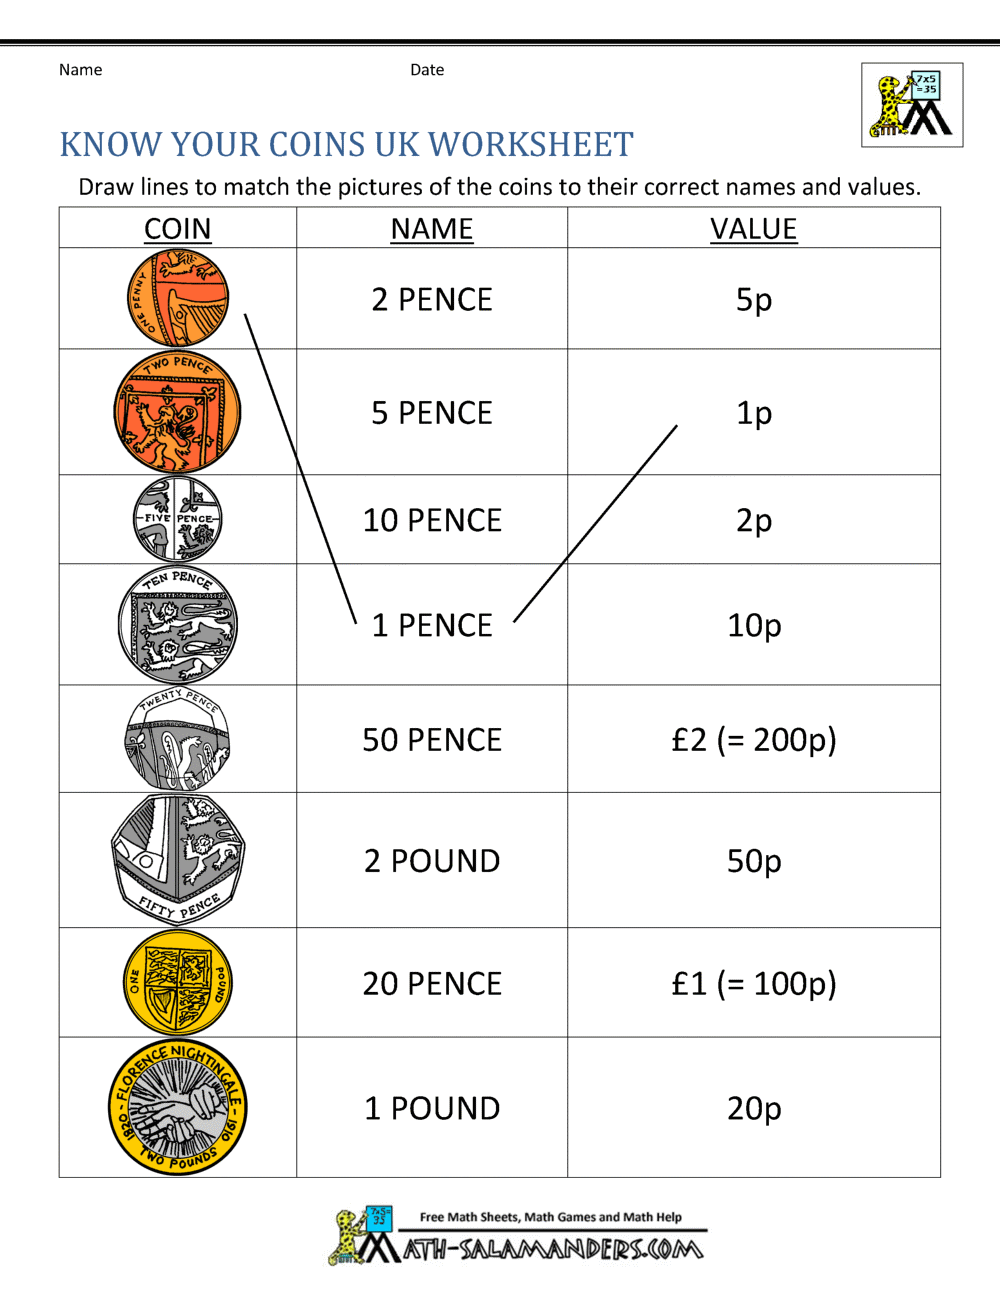 Free Counting Money Worksheets UK Coins